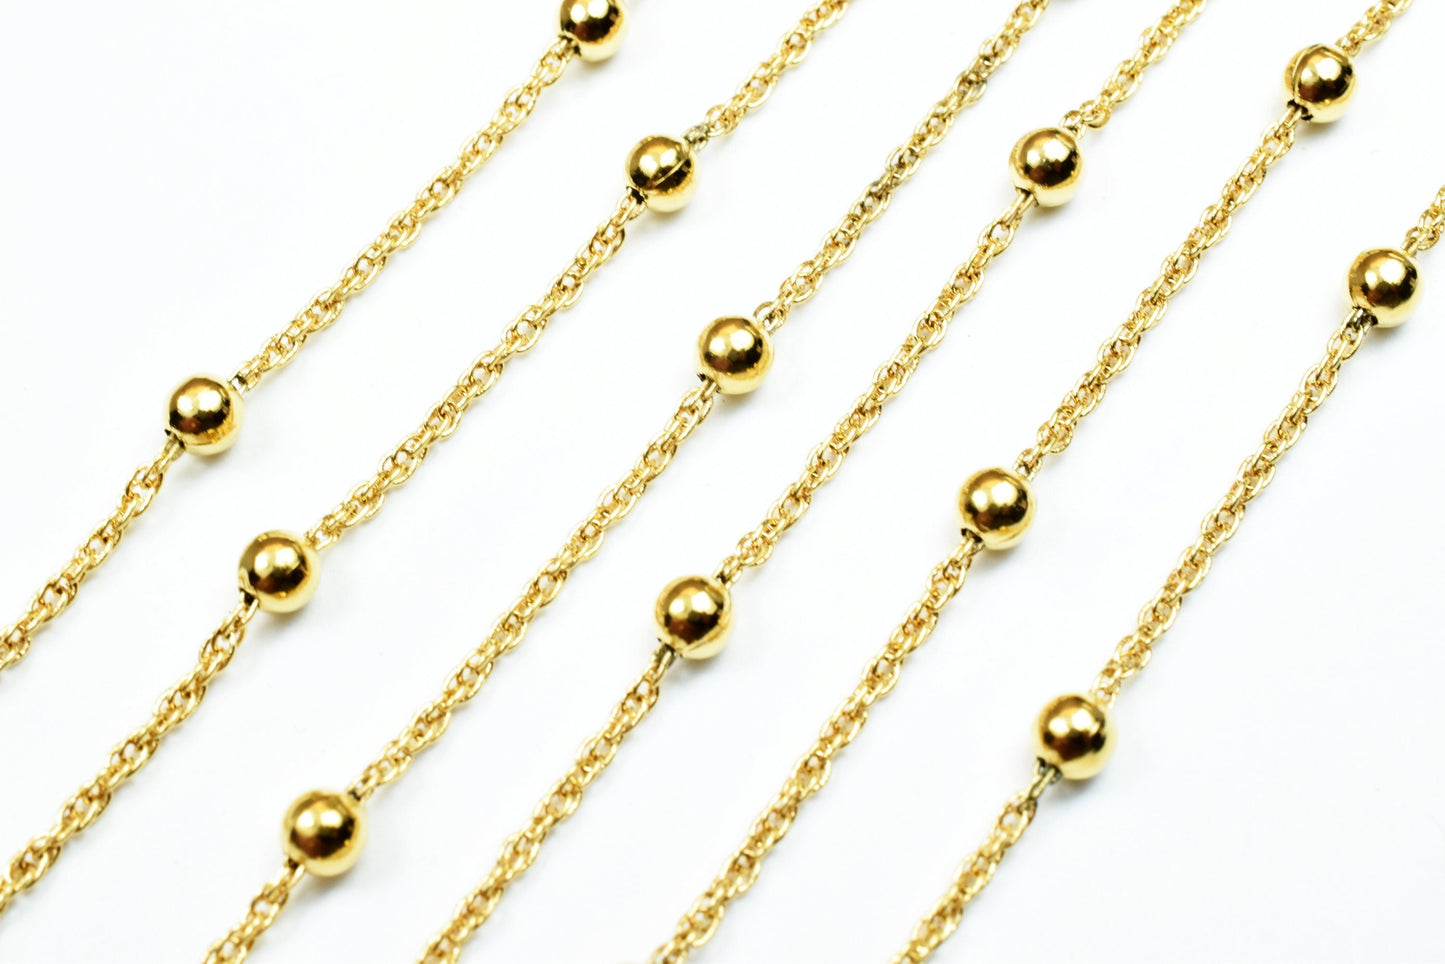 Gold Plated* satellite chain 18k ball size 3.5mm chain size 1mm for jewelry making gfc51 sold by foo